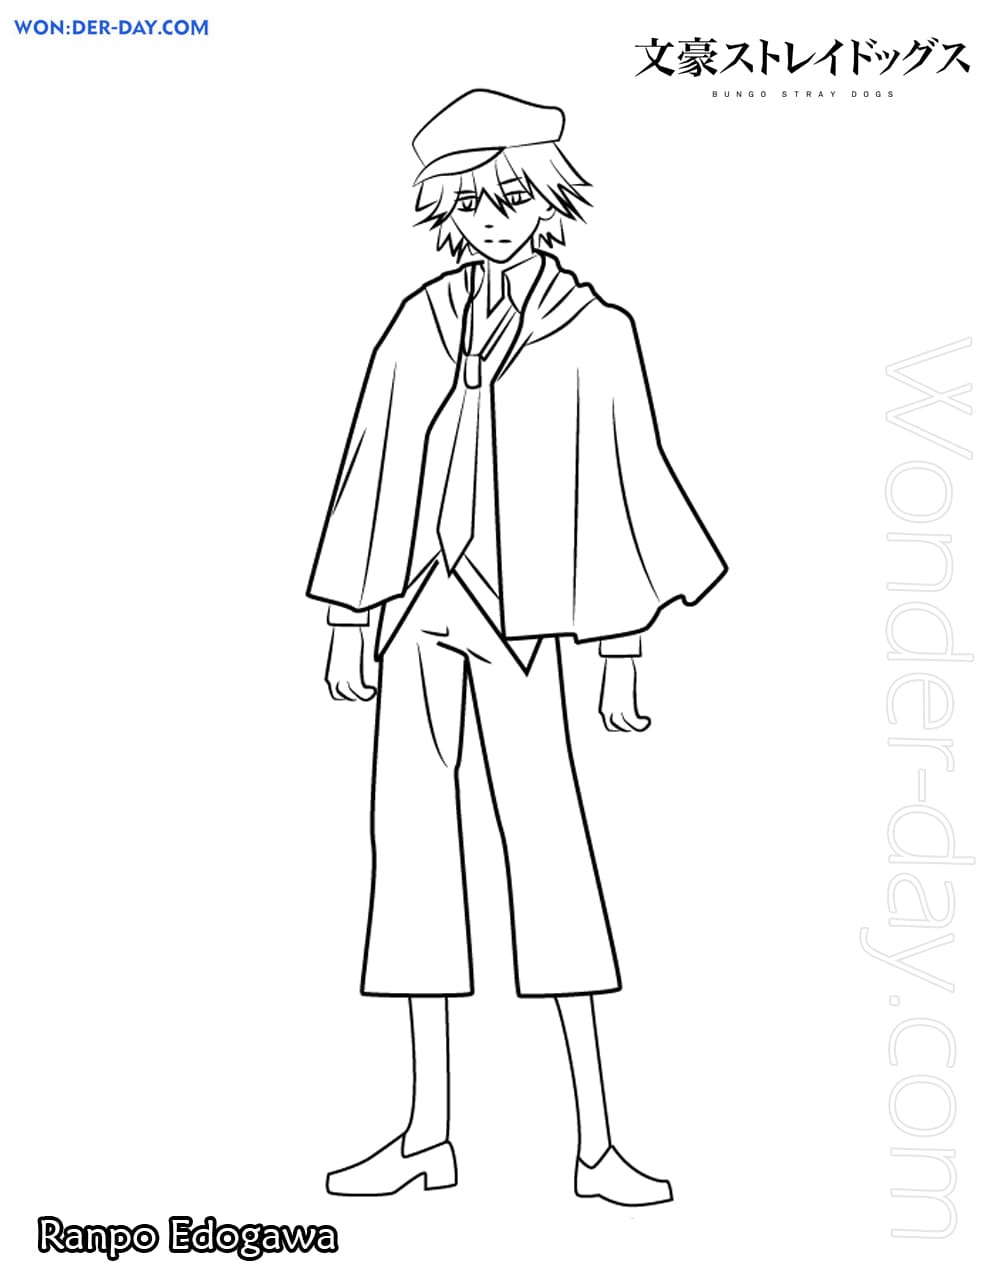 Bungou Stray Dogs coloring pages | WONDER DAY — Coloring pages for ...